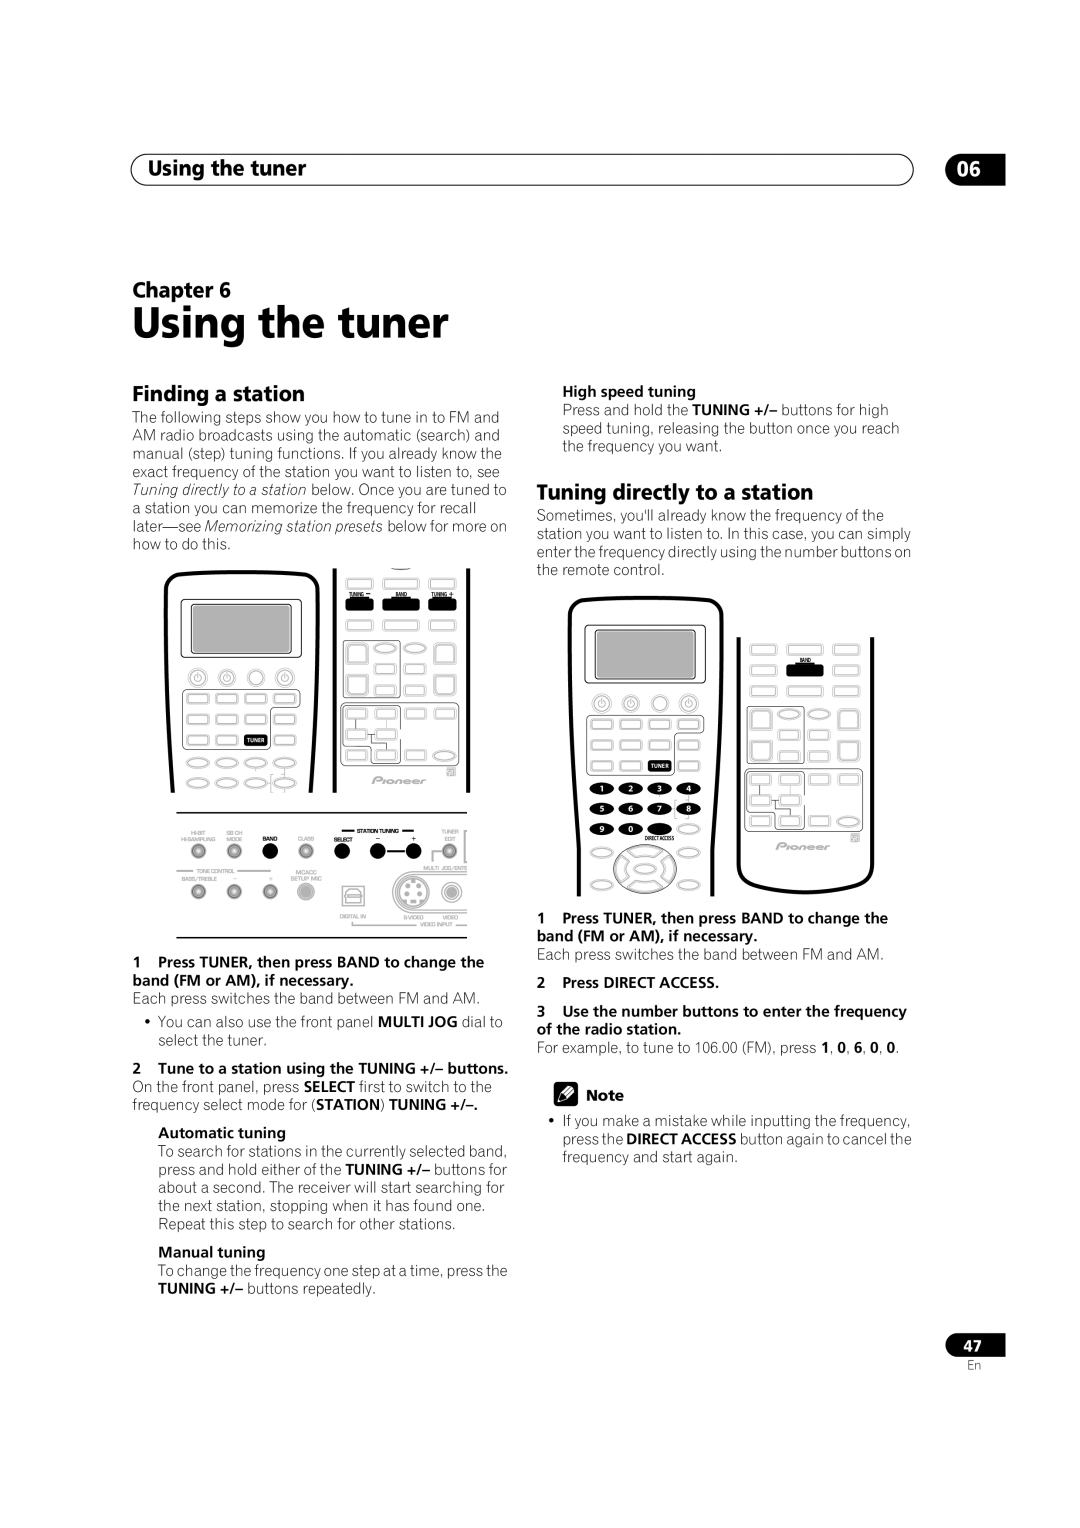 Pioneer VSX-9300TX manual Using the tuner Chapter, Finding a station, Tuning directly to a station 